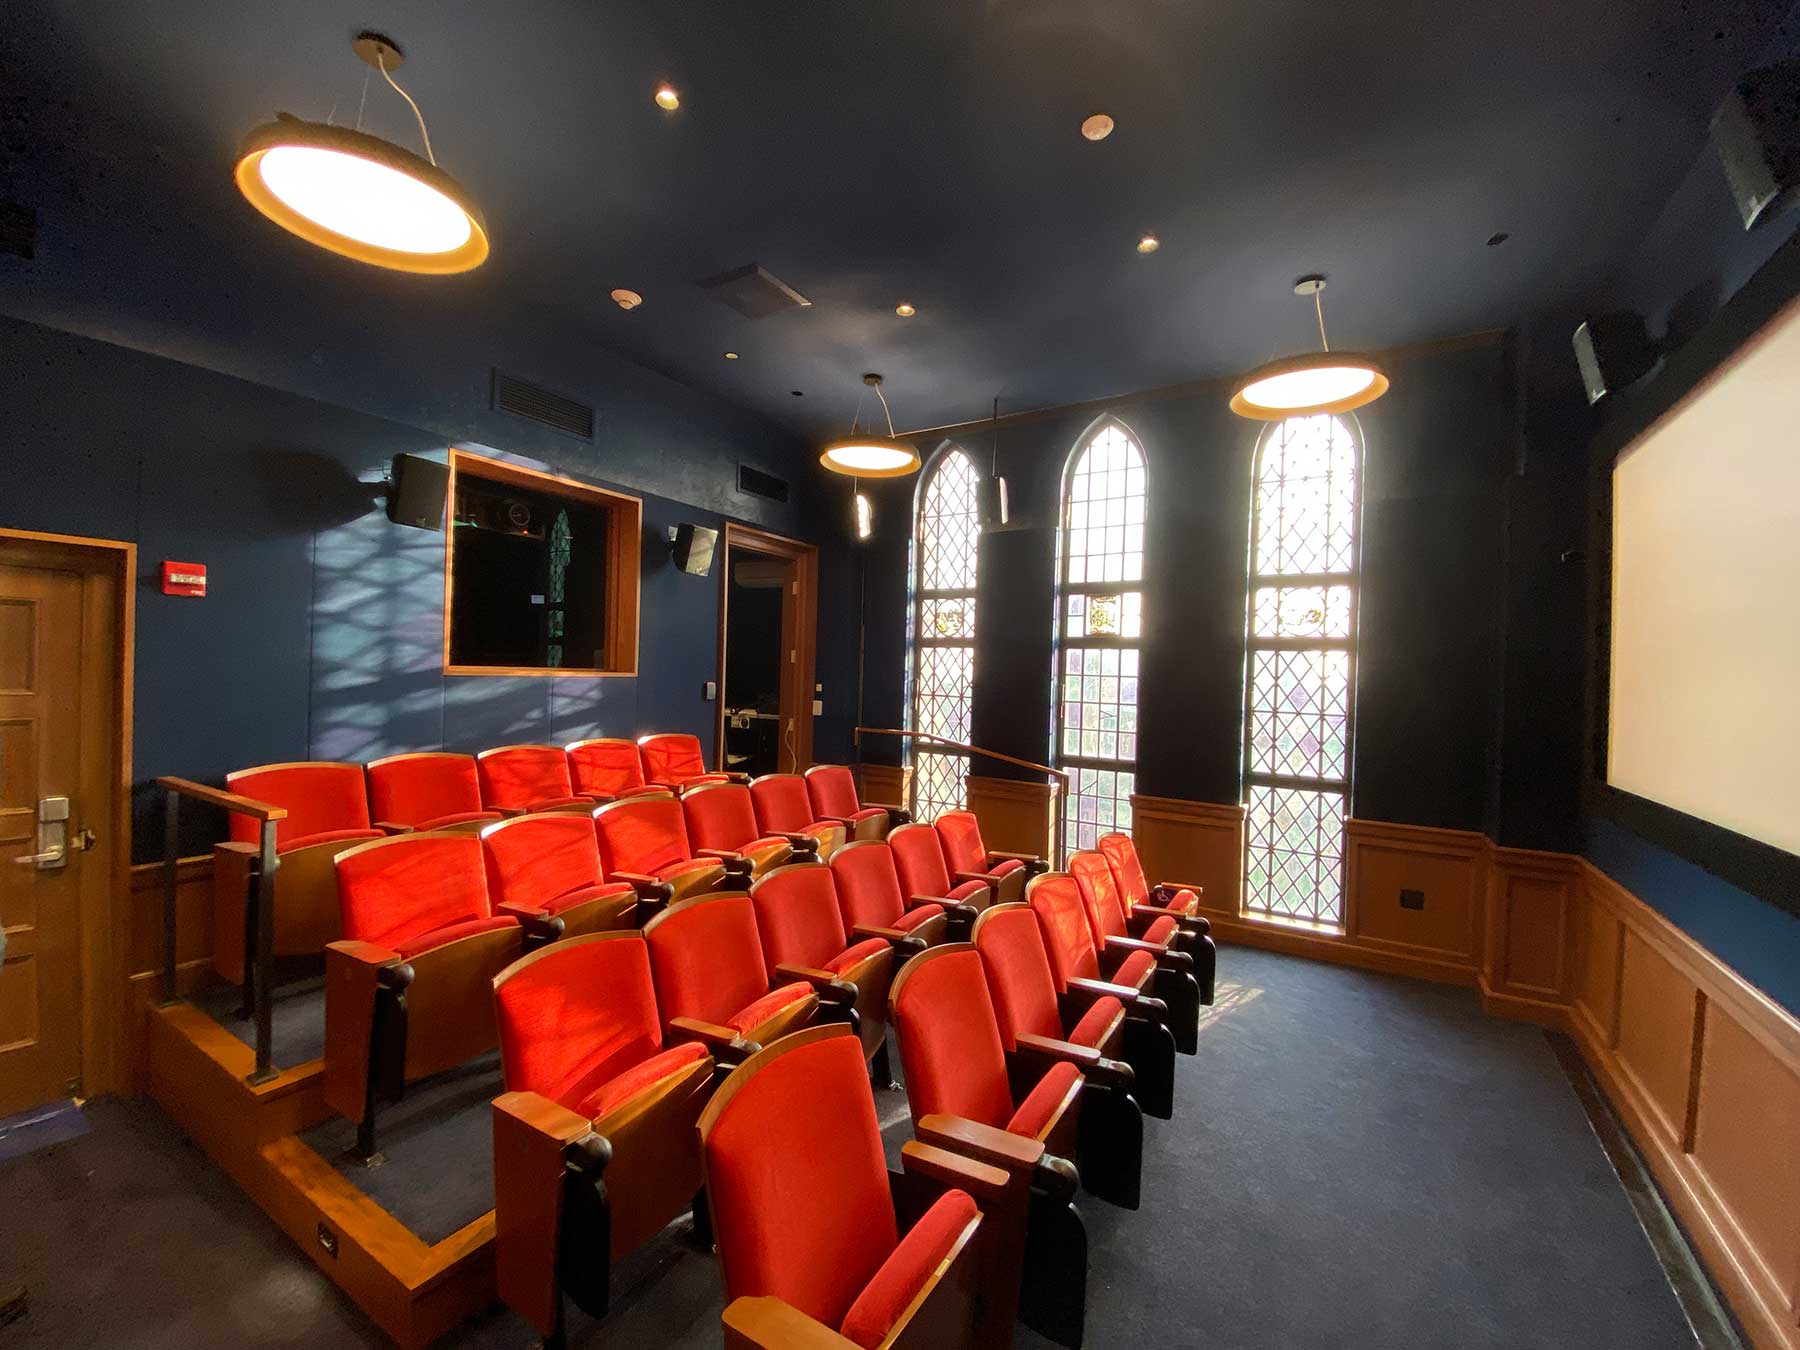 Screening room of red seats in front of a movie screen, part of the Yale Film Archive